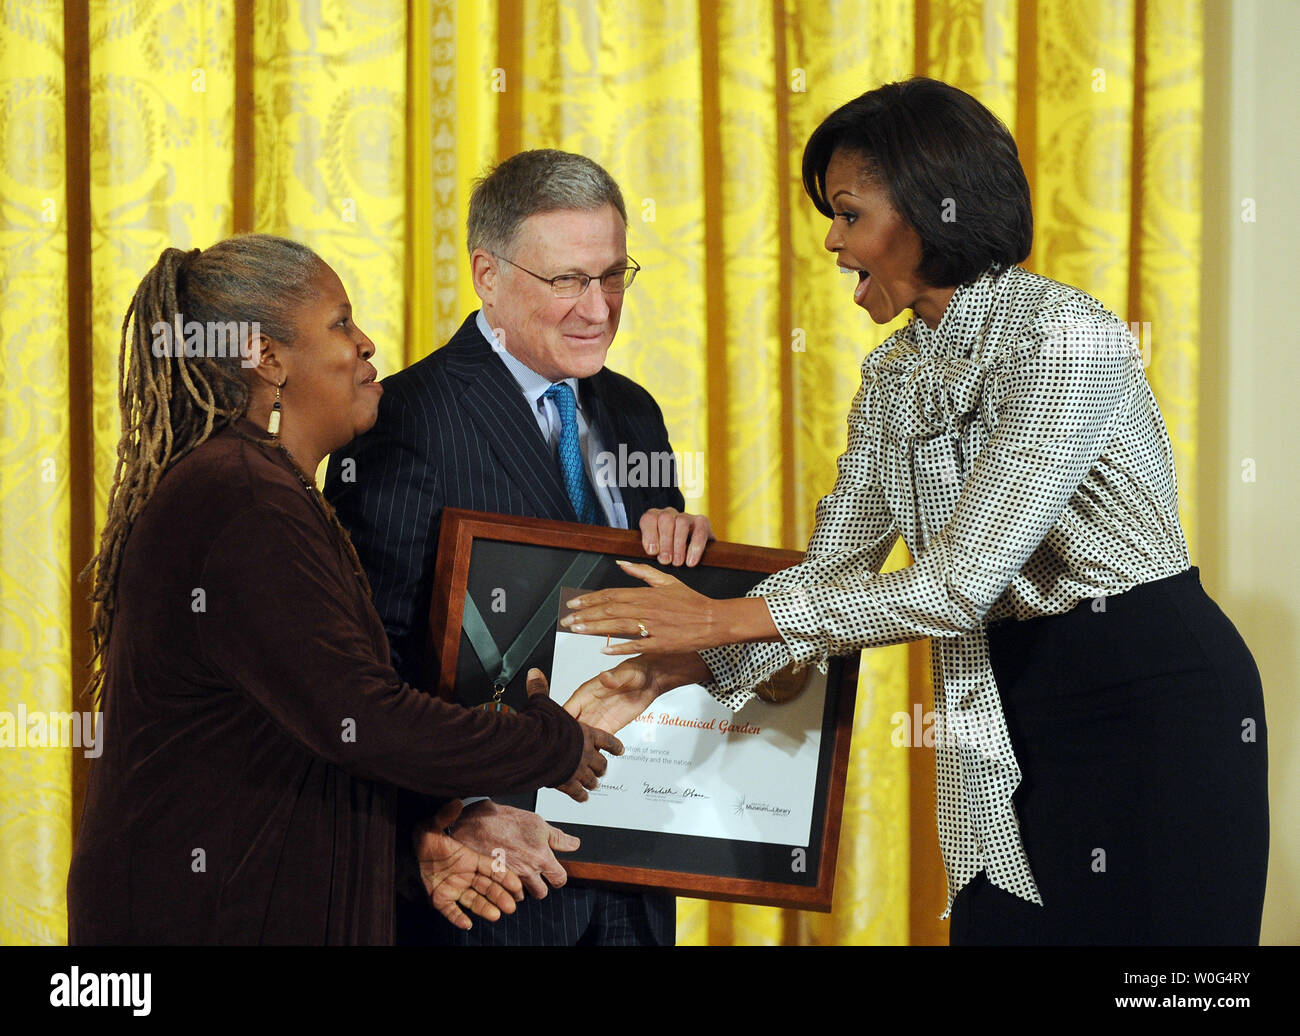 First Lady Michelle Obama presents a 2010 National Medal for Museum and Library Service to community member Karen Washington and Gregory Long, president and CEO of the New York Botanical Garden in New York City, during a ceremony in the East Room of the White House  in Washington on December 17, 2010.   UPI/Roger L. Wollenberg Stock Photo